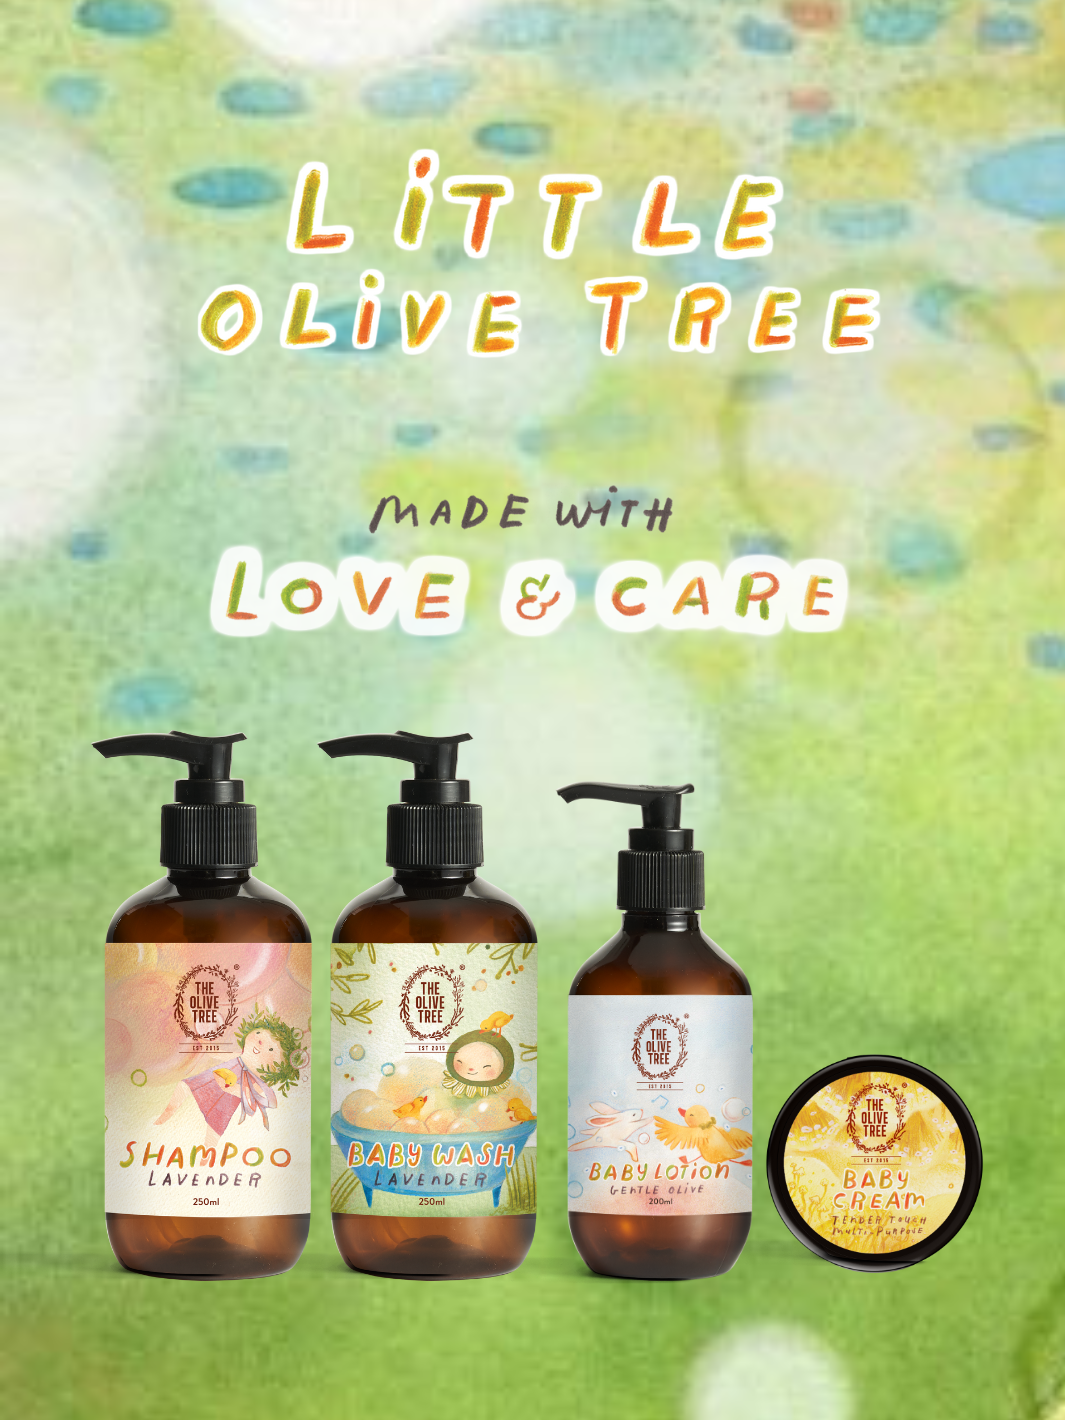 Little Olive Tree - A Safe & Delightful Collection for Your Little Ones is Now Officially Launched!